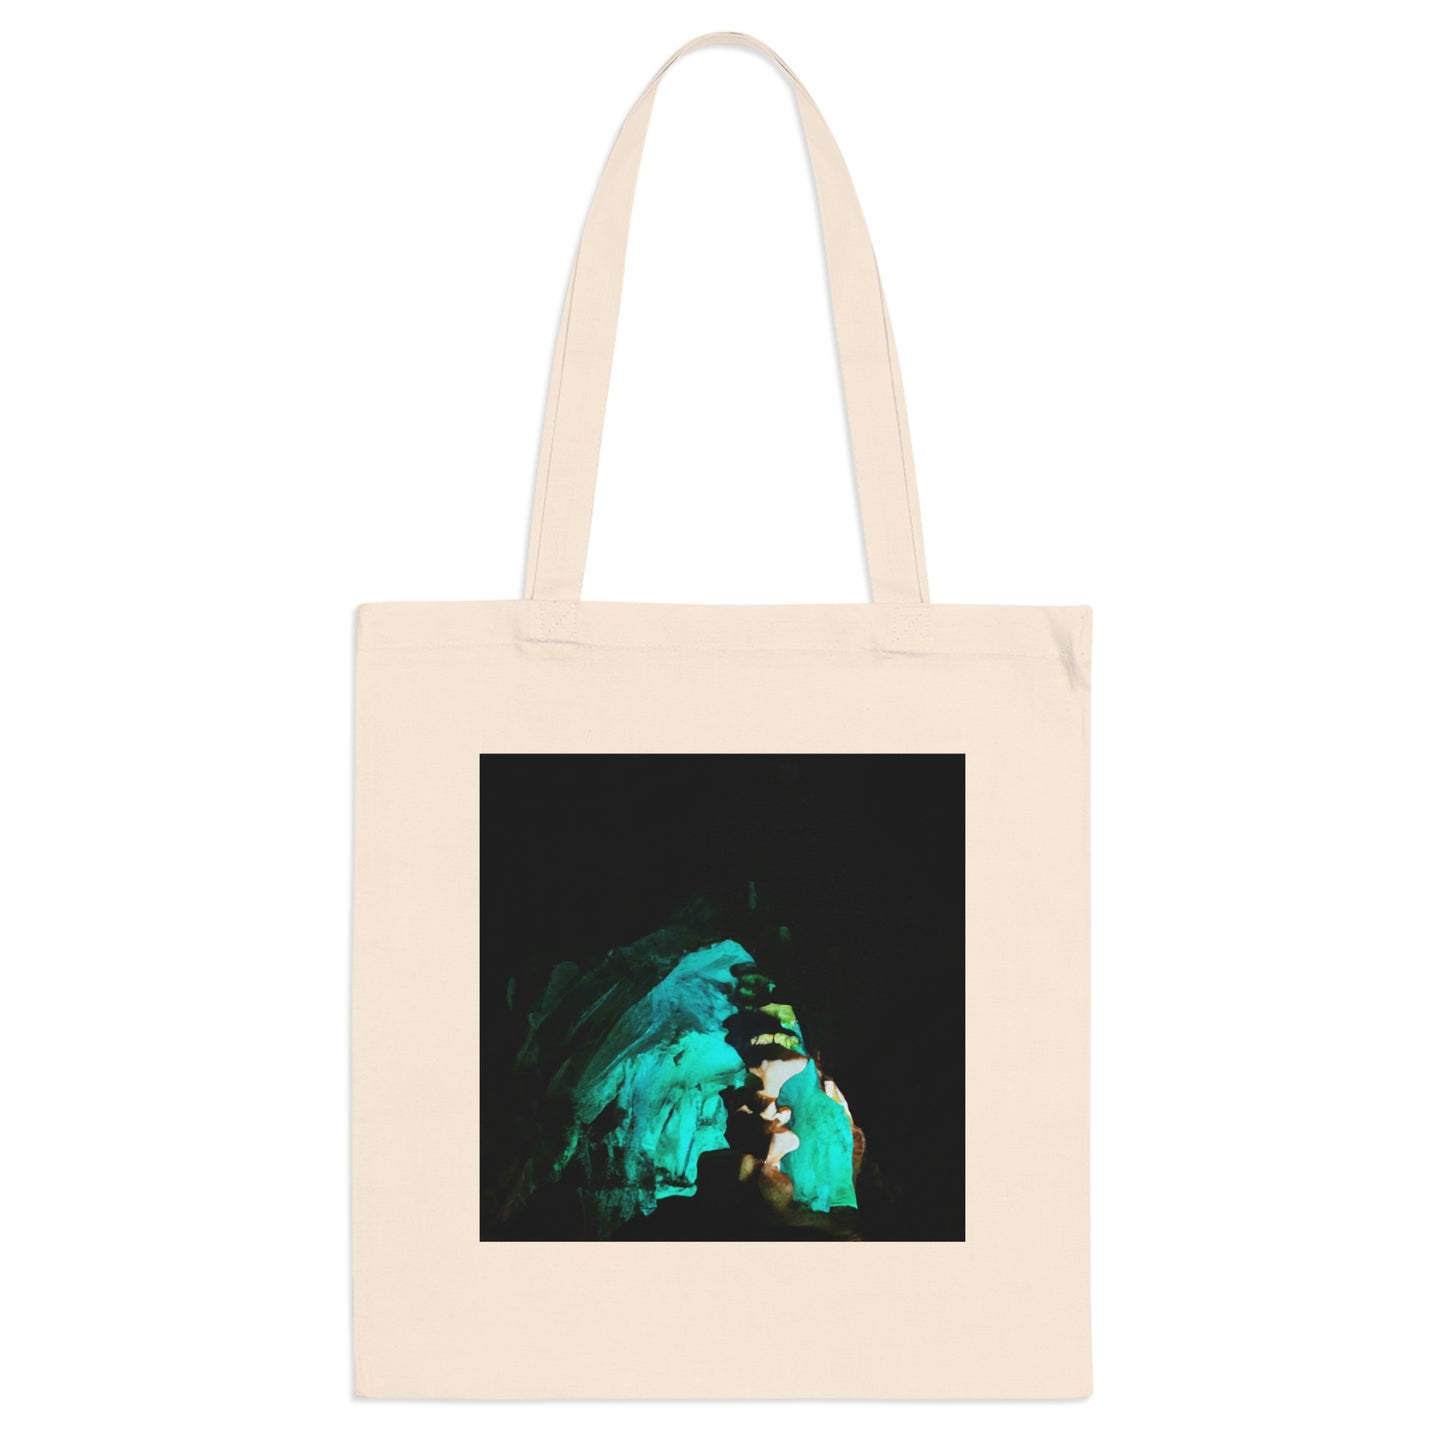 The Gleaming Relic of the Cave - The Alien Tote Bag